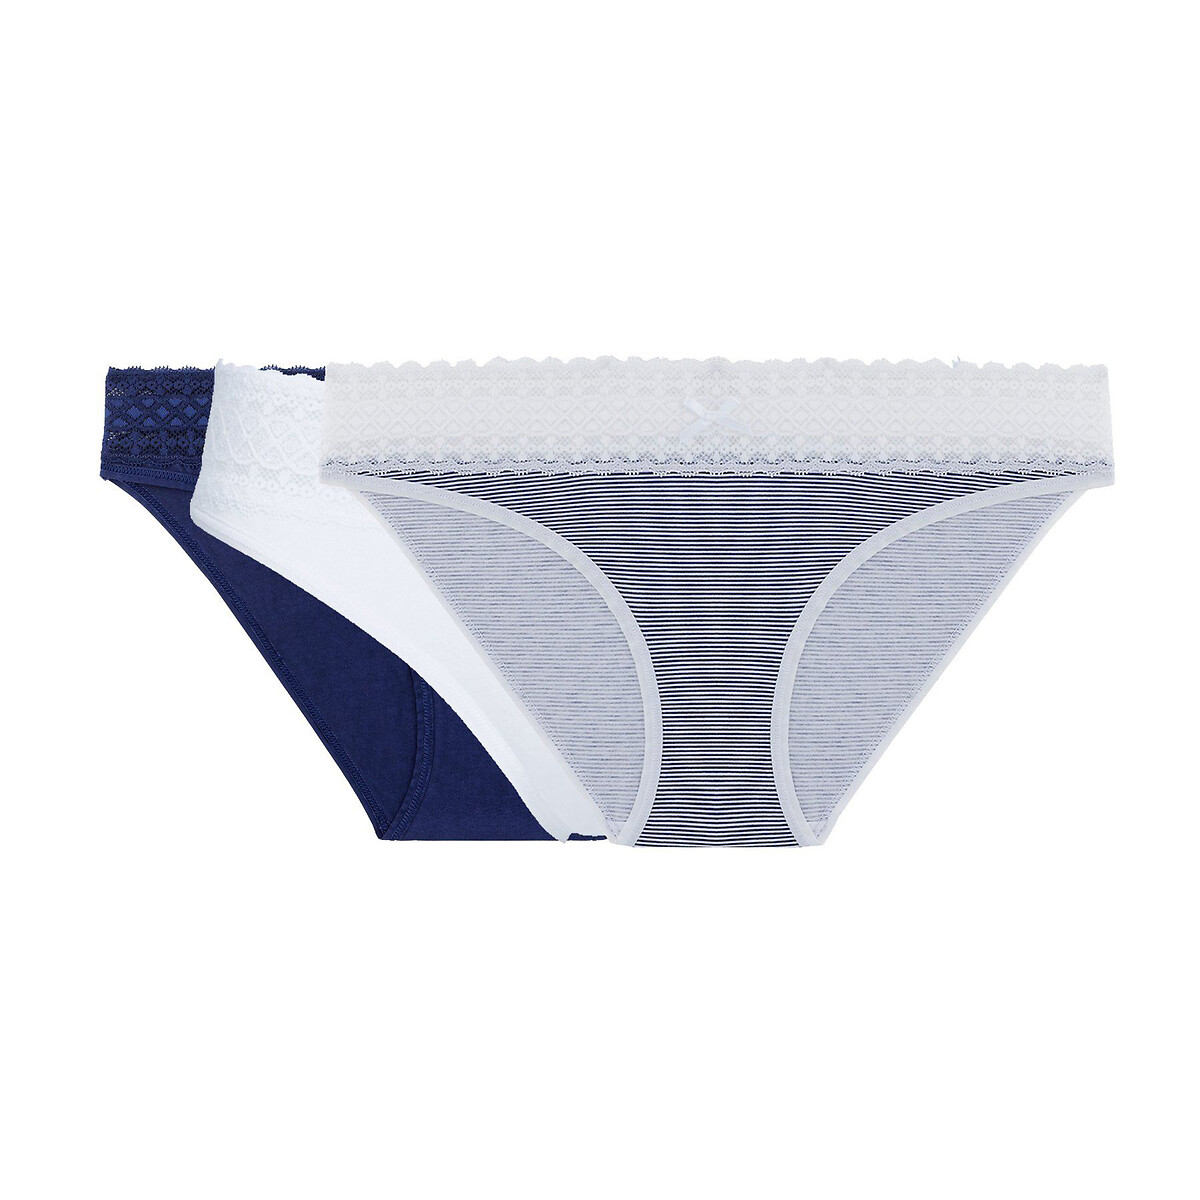 Pack of 3 Les Cotons Knickers in Organic Cotton Mix